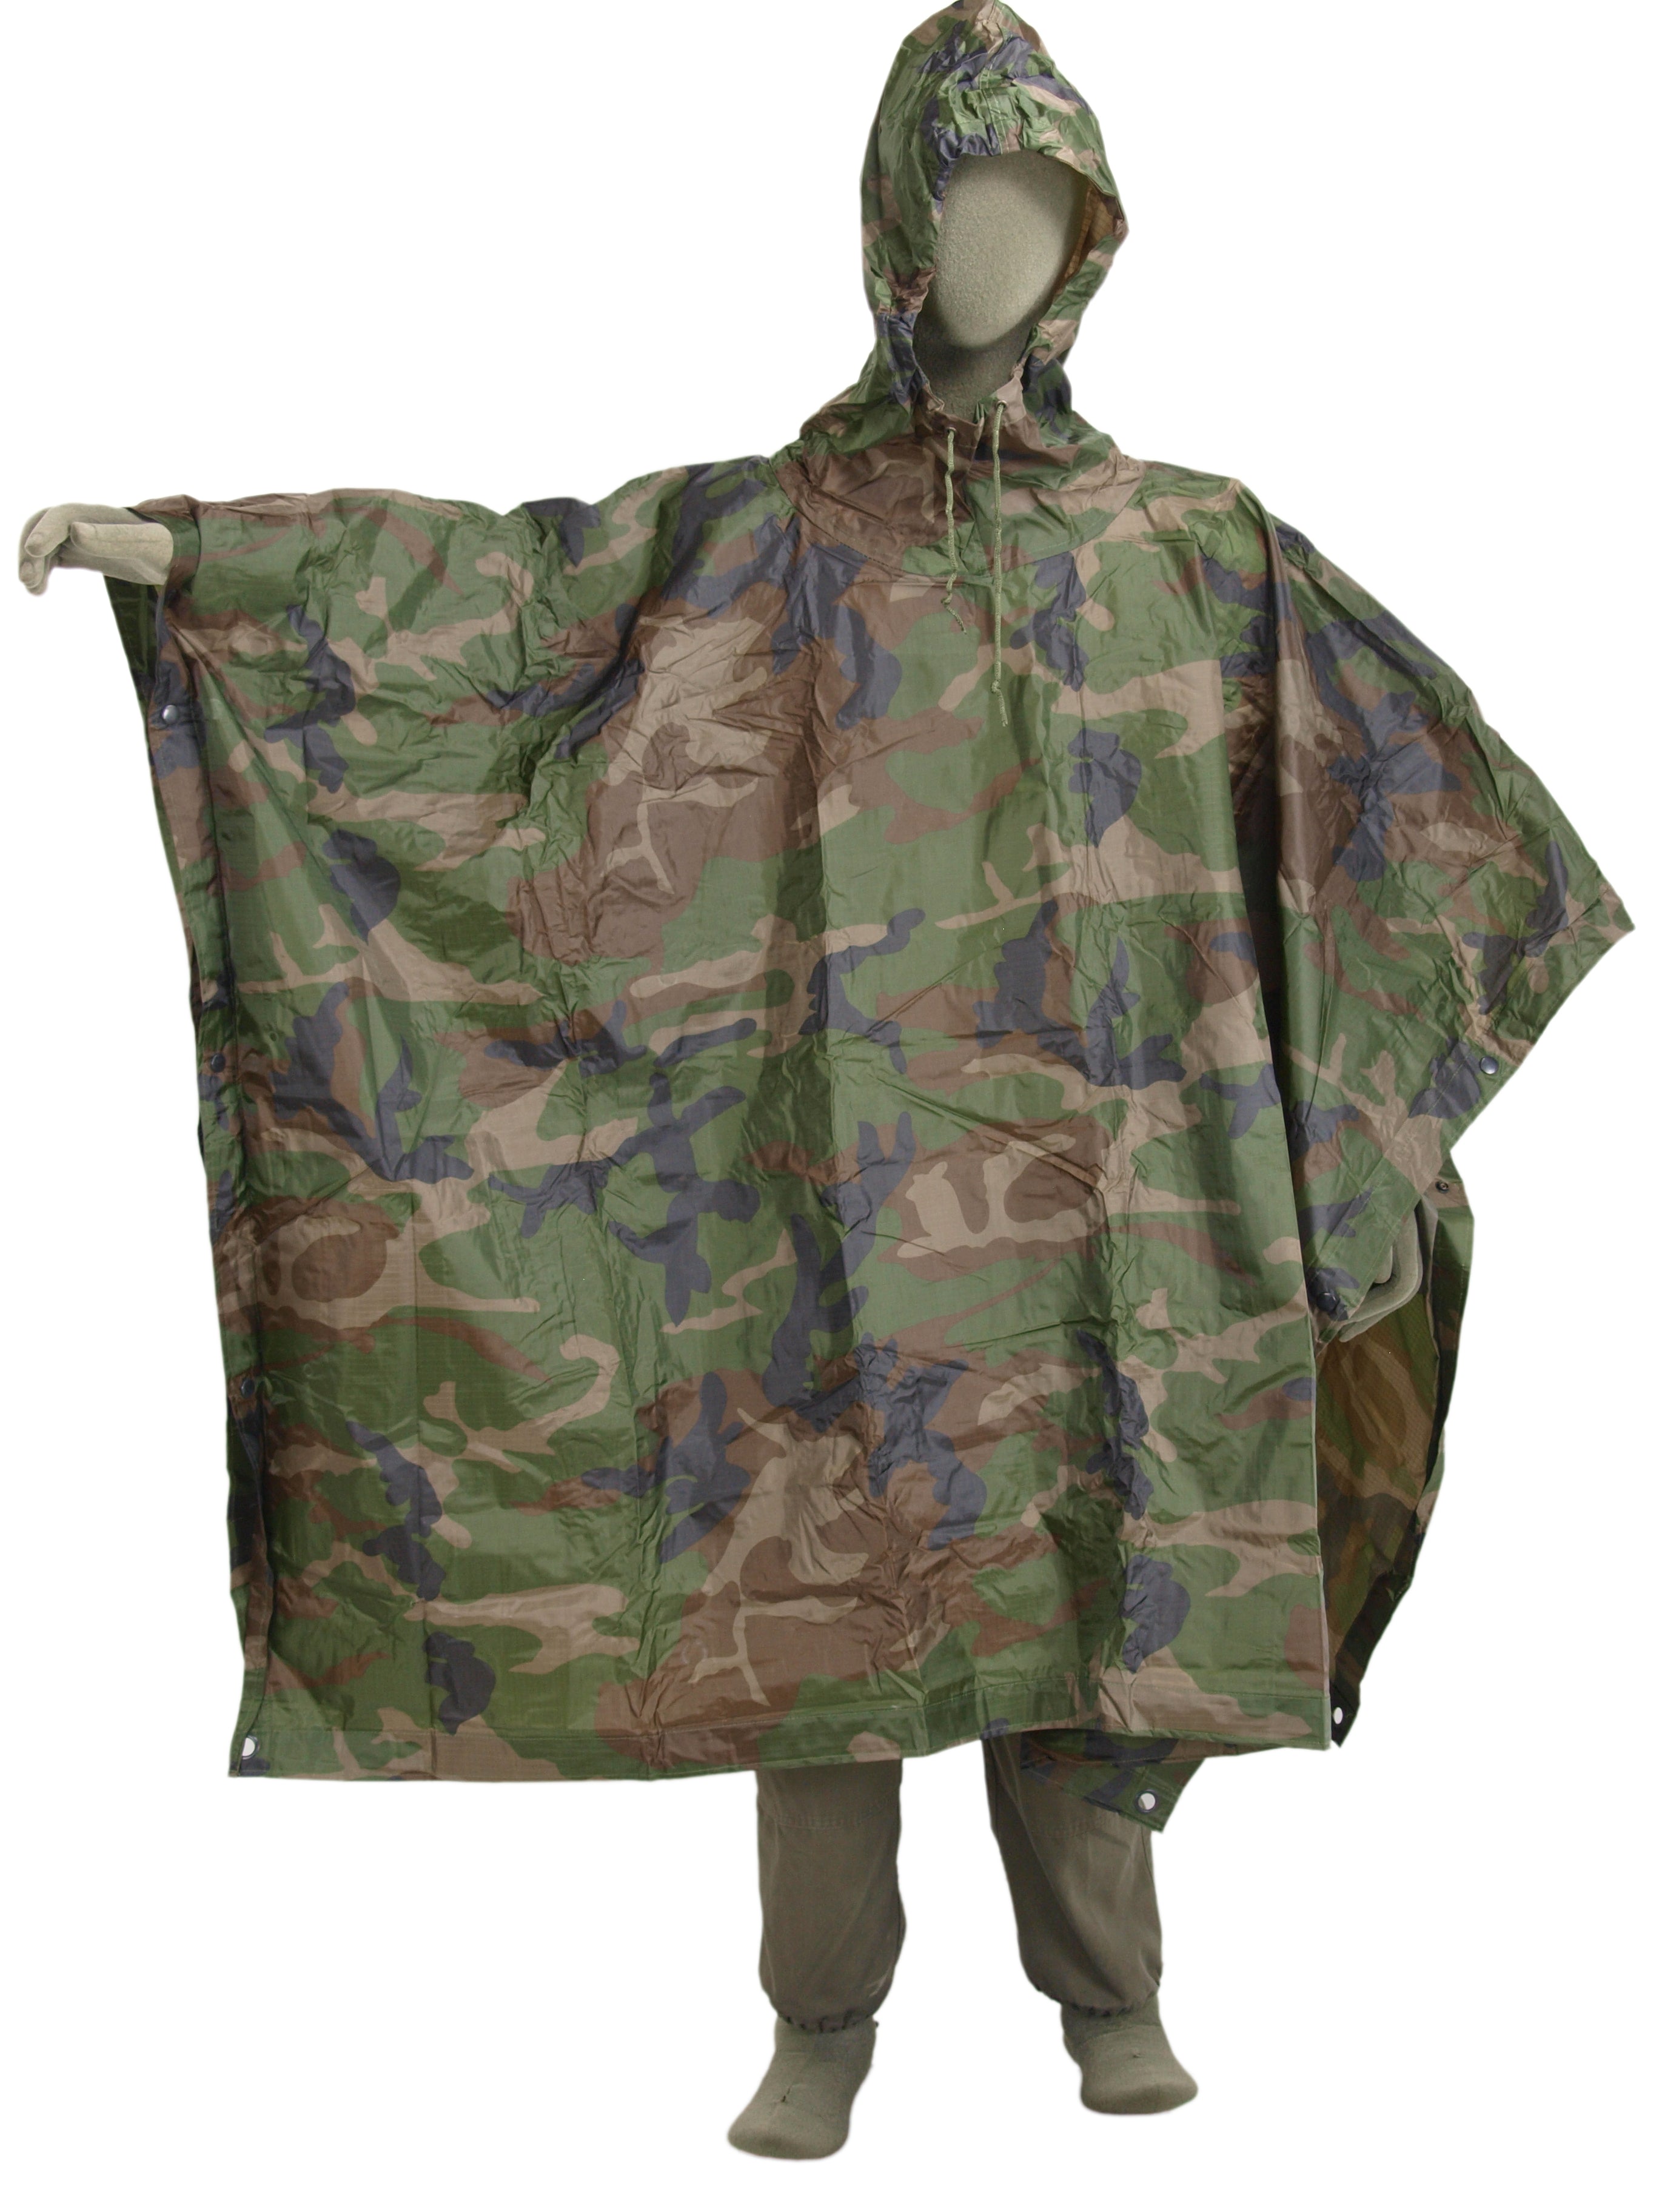 Legion African Jungle poncho - New in bag - Forces Uniform Kit